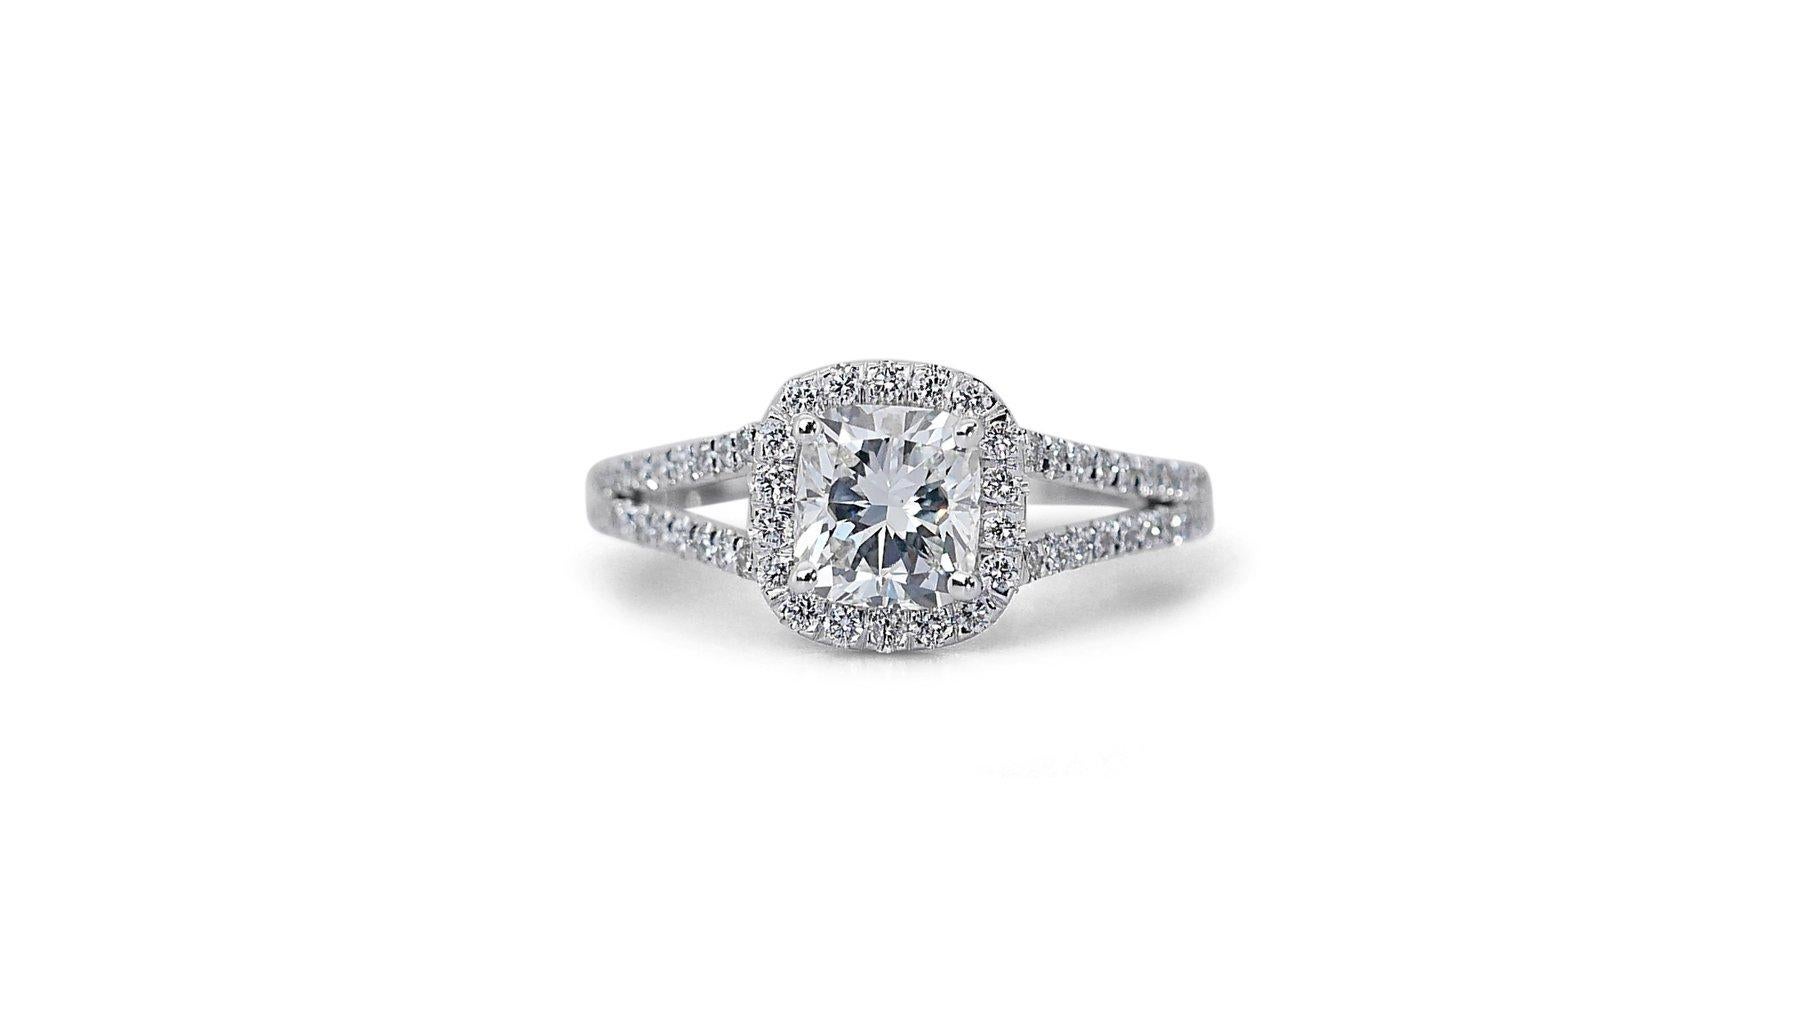 This captivating ring features a dazzling 1.01 carat cushion cut natural diamond, showcasing a captivating G-H color and VS2 clarity that exudes elegance and sophistication. The diamond's VG cut grade ensures exceptional sparkle and brilliance,